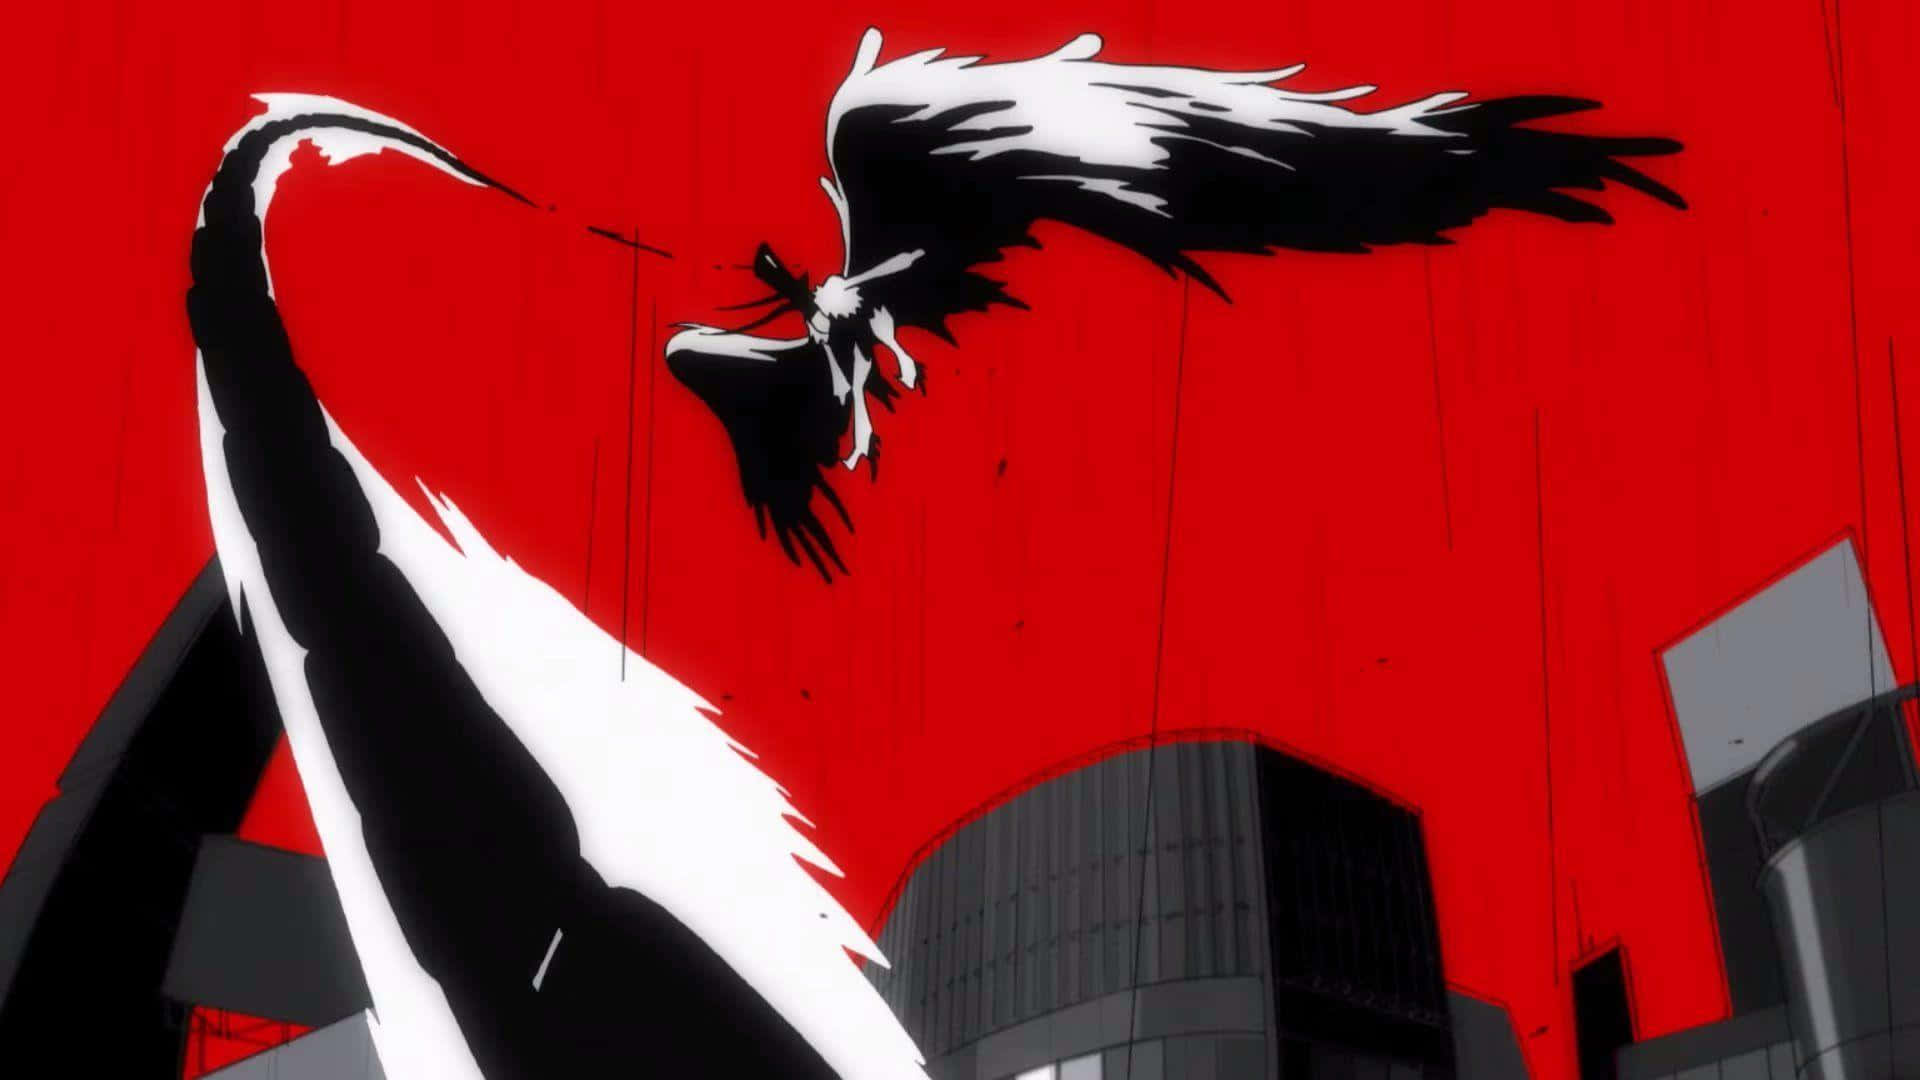 Step into a thrilling world of mystery and adventure in Persona 5